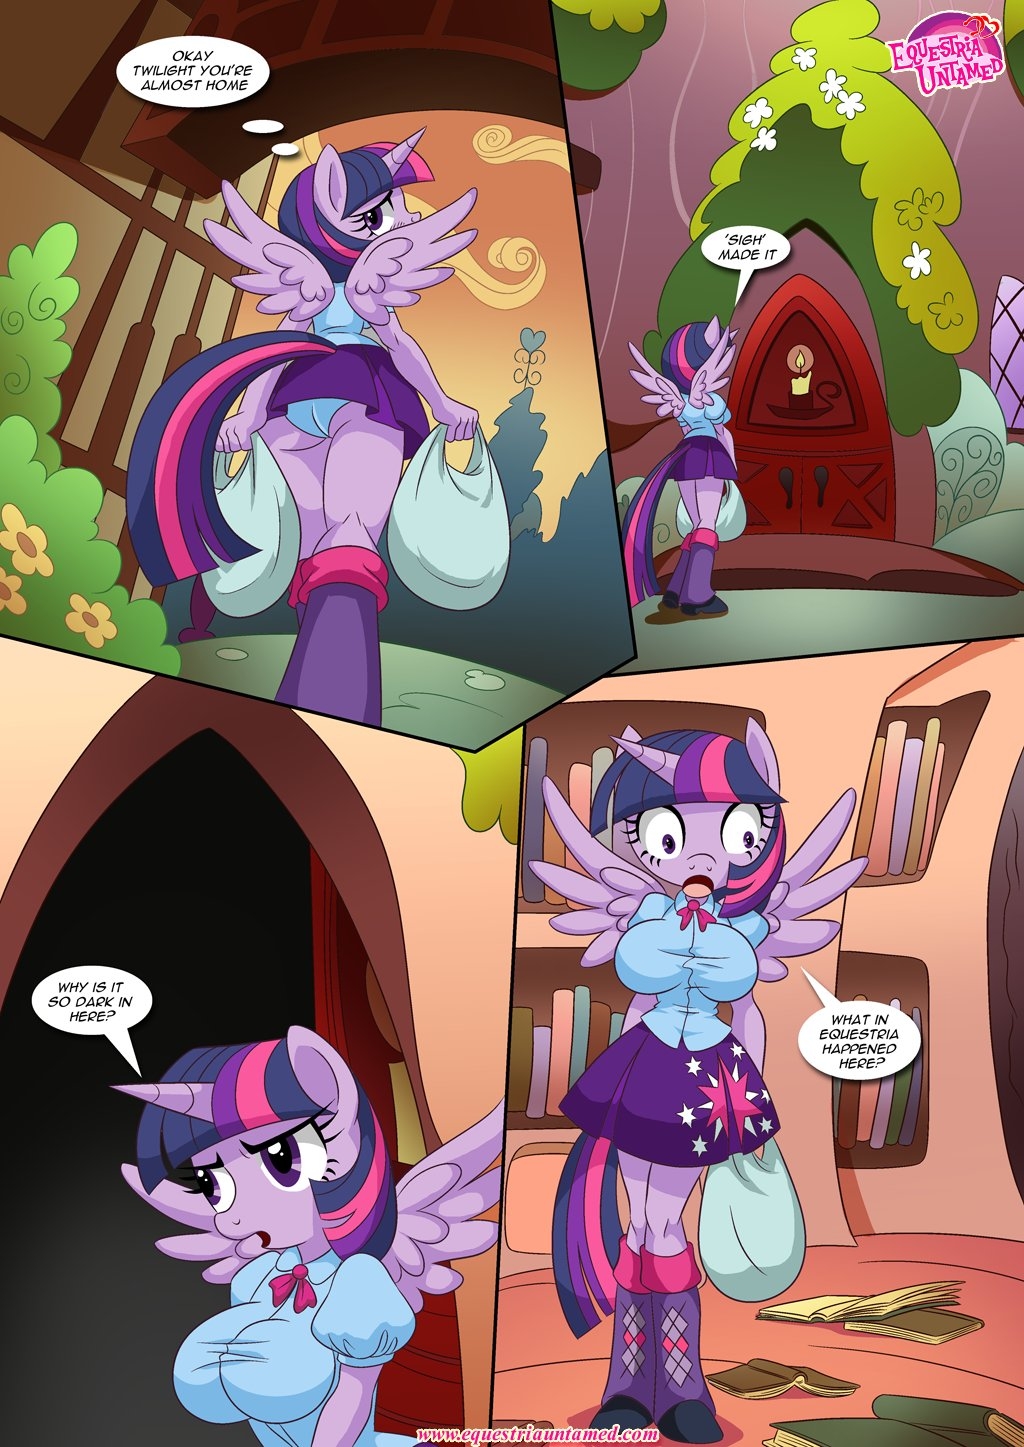 [Palcomix] Sex Ed with Miss Twilight Sparkle (My Little Pony Friendship is Magic) 2